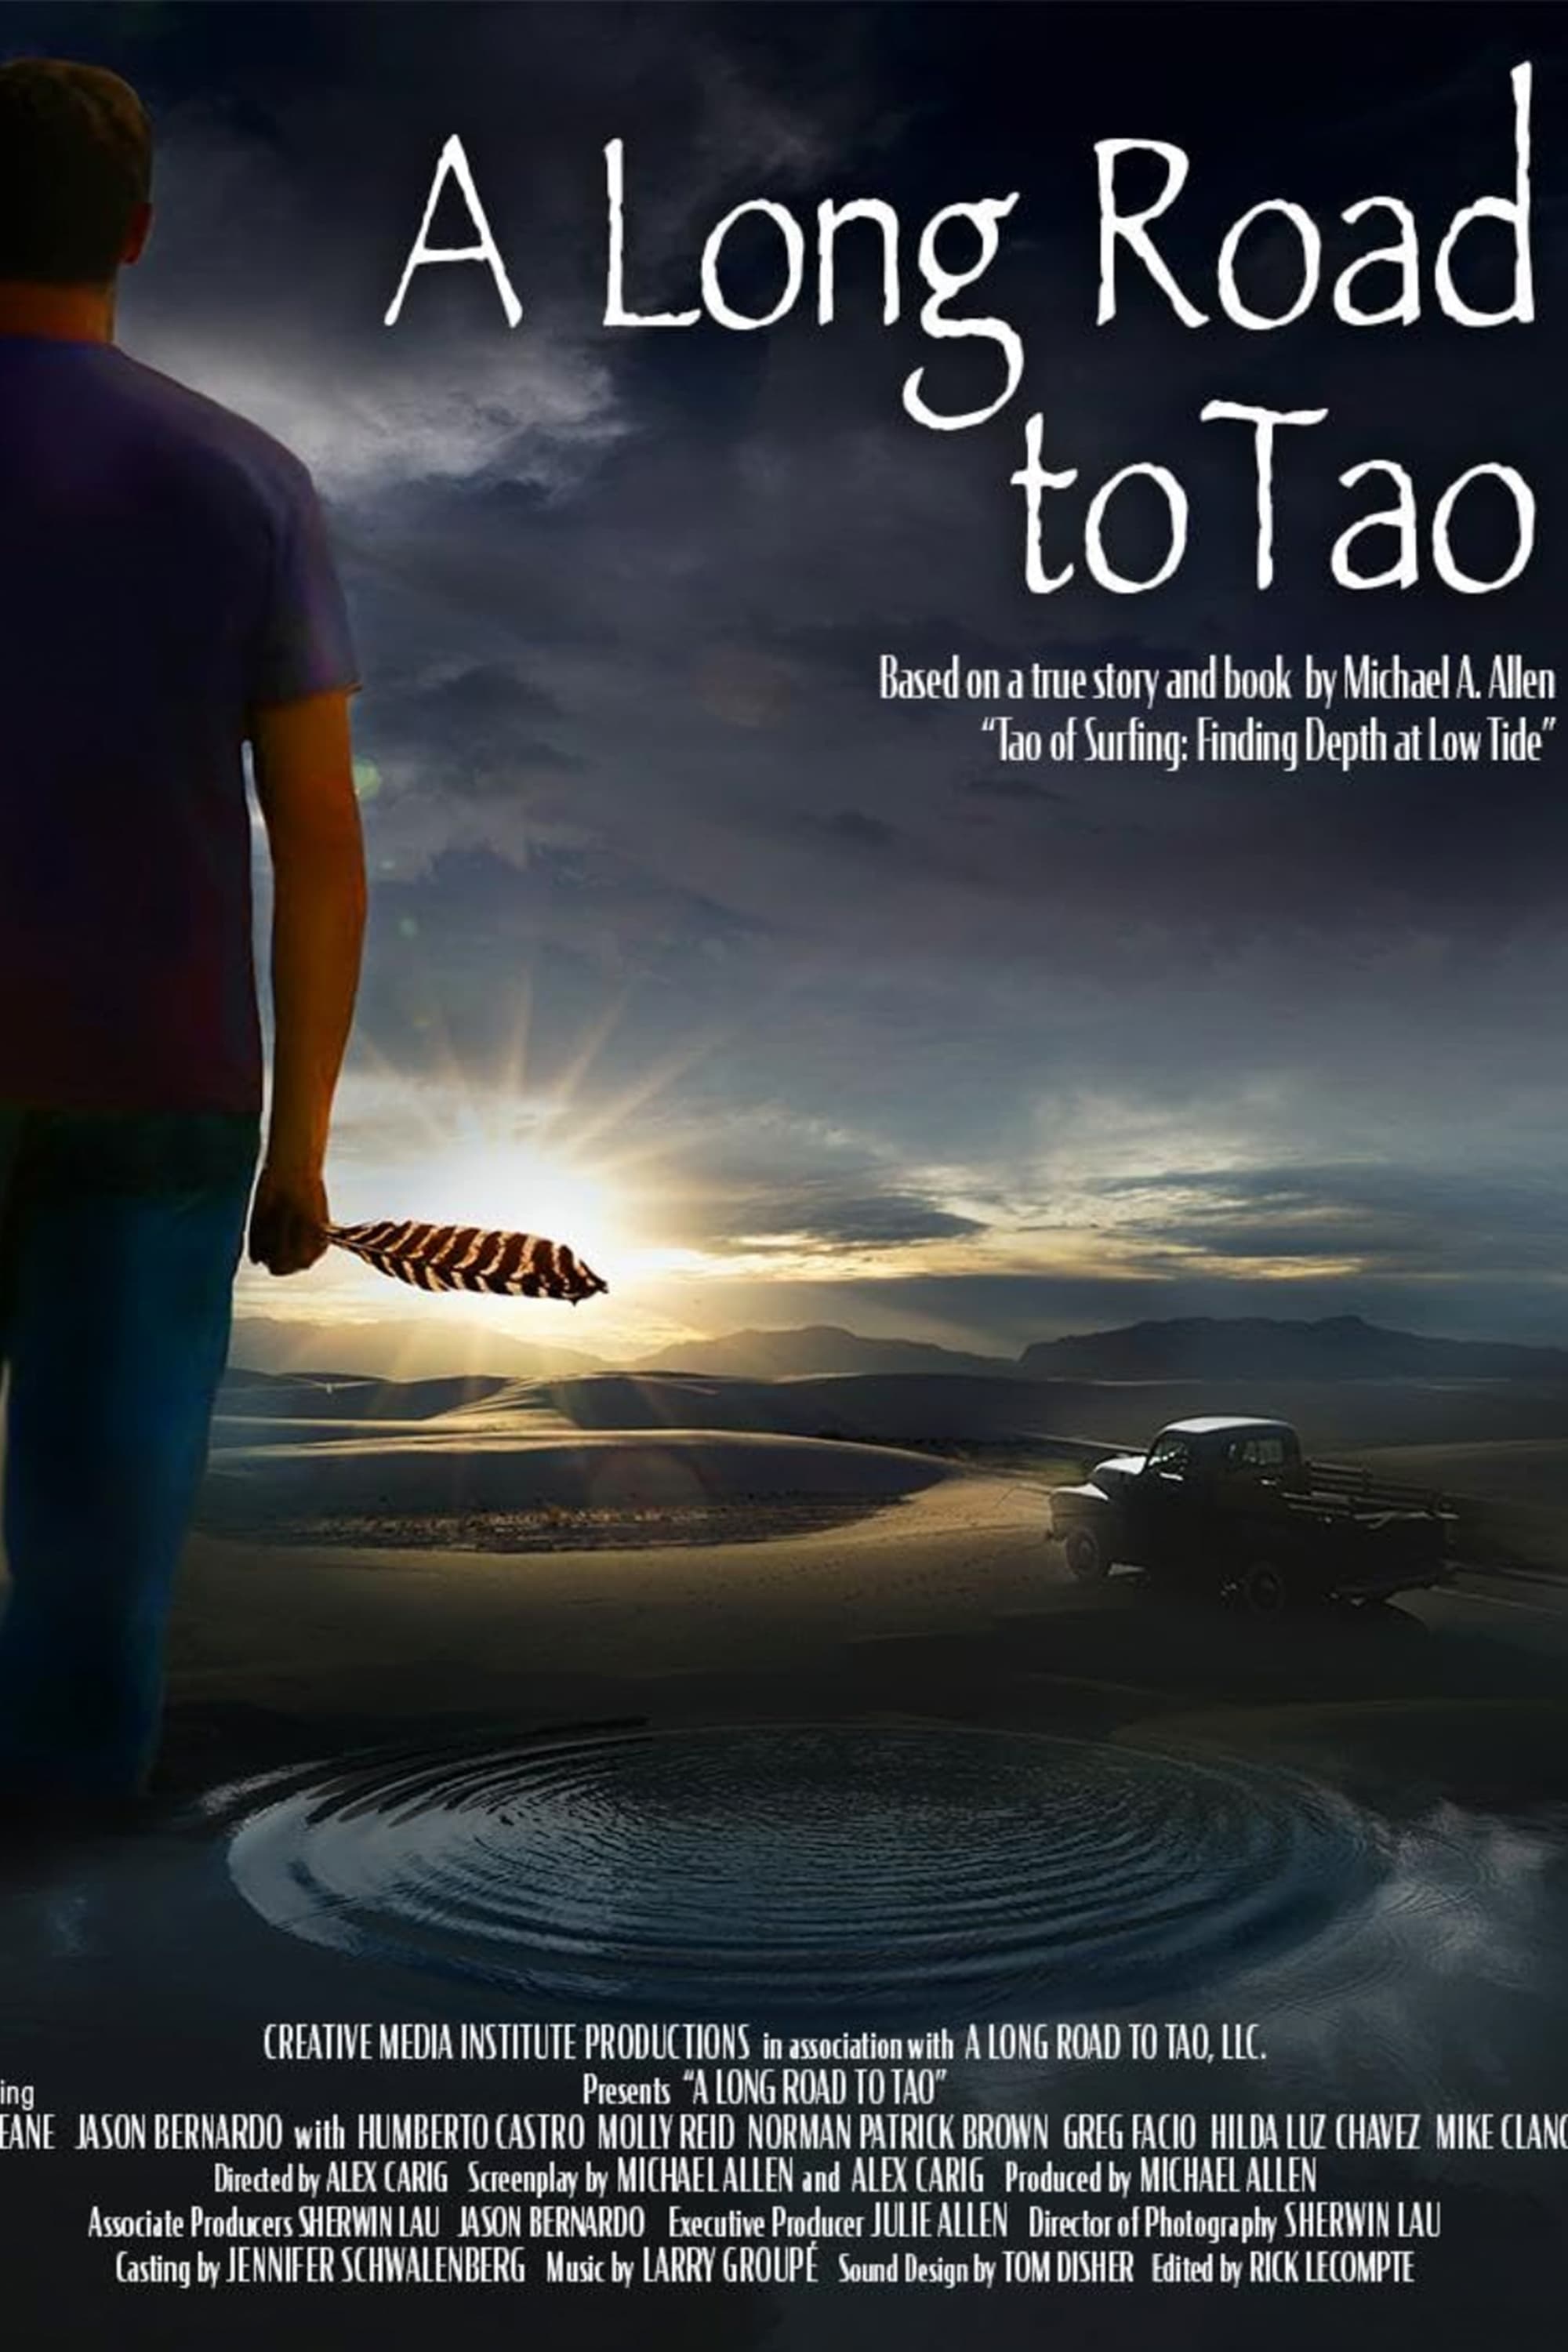 A Long Road to Tao